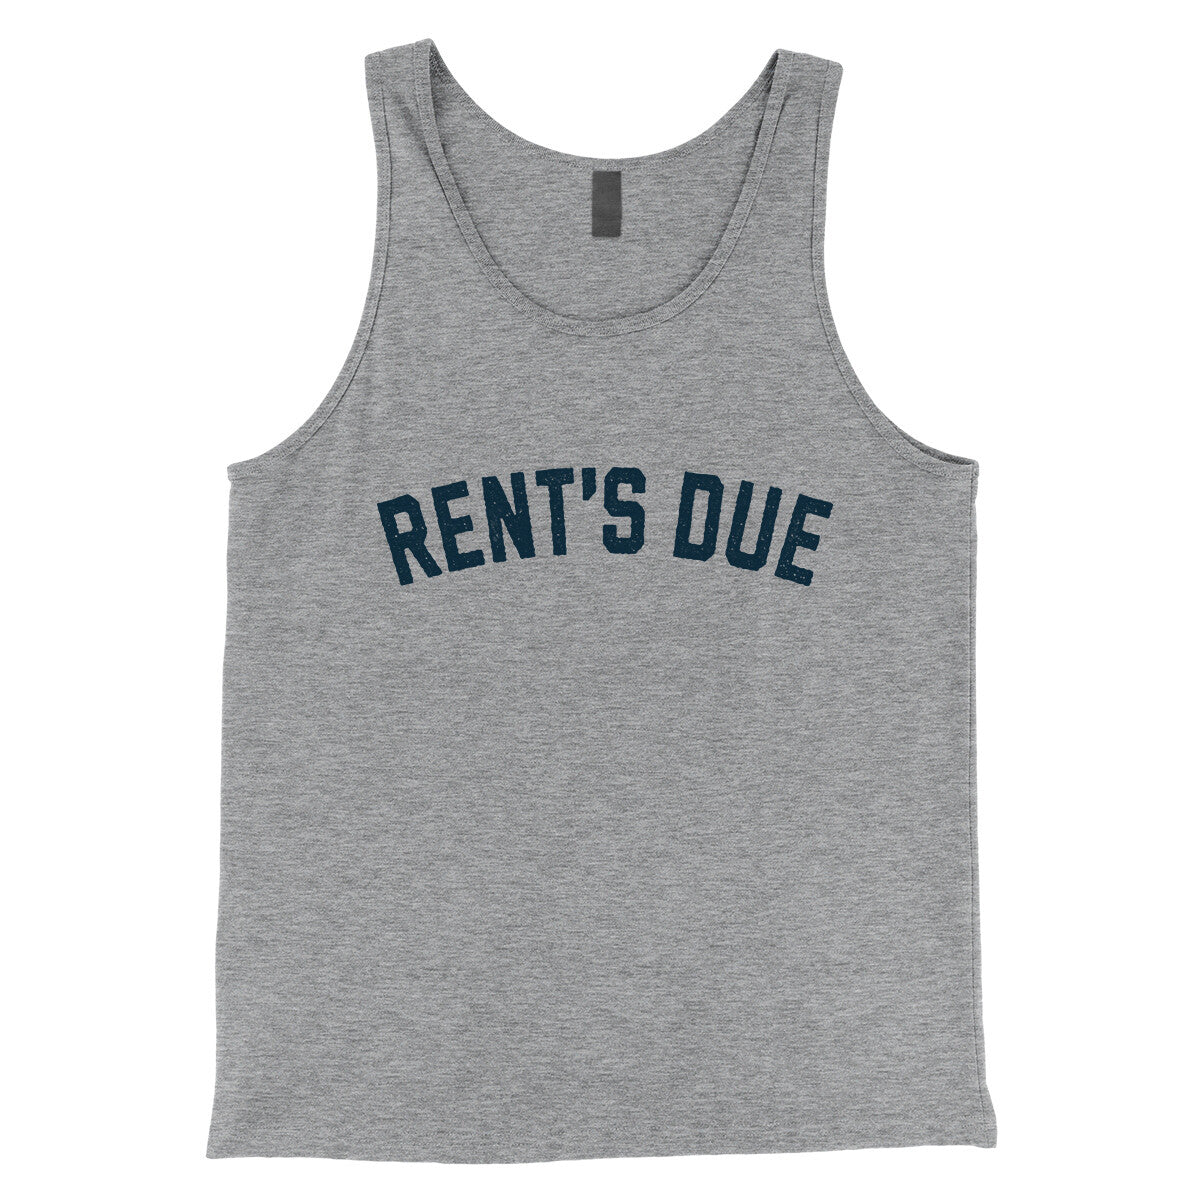 Rent's Due in Athletic Heather Color